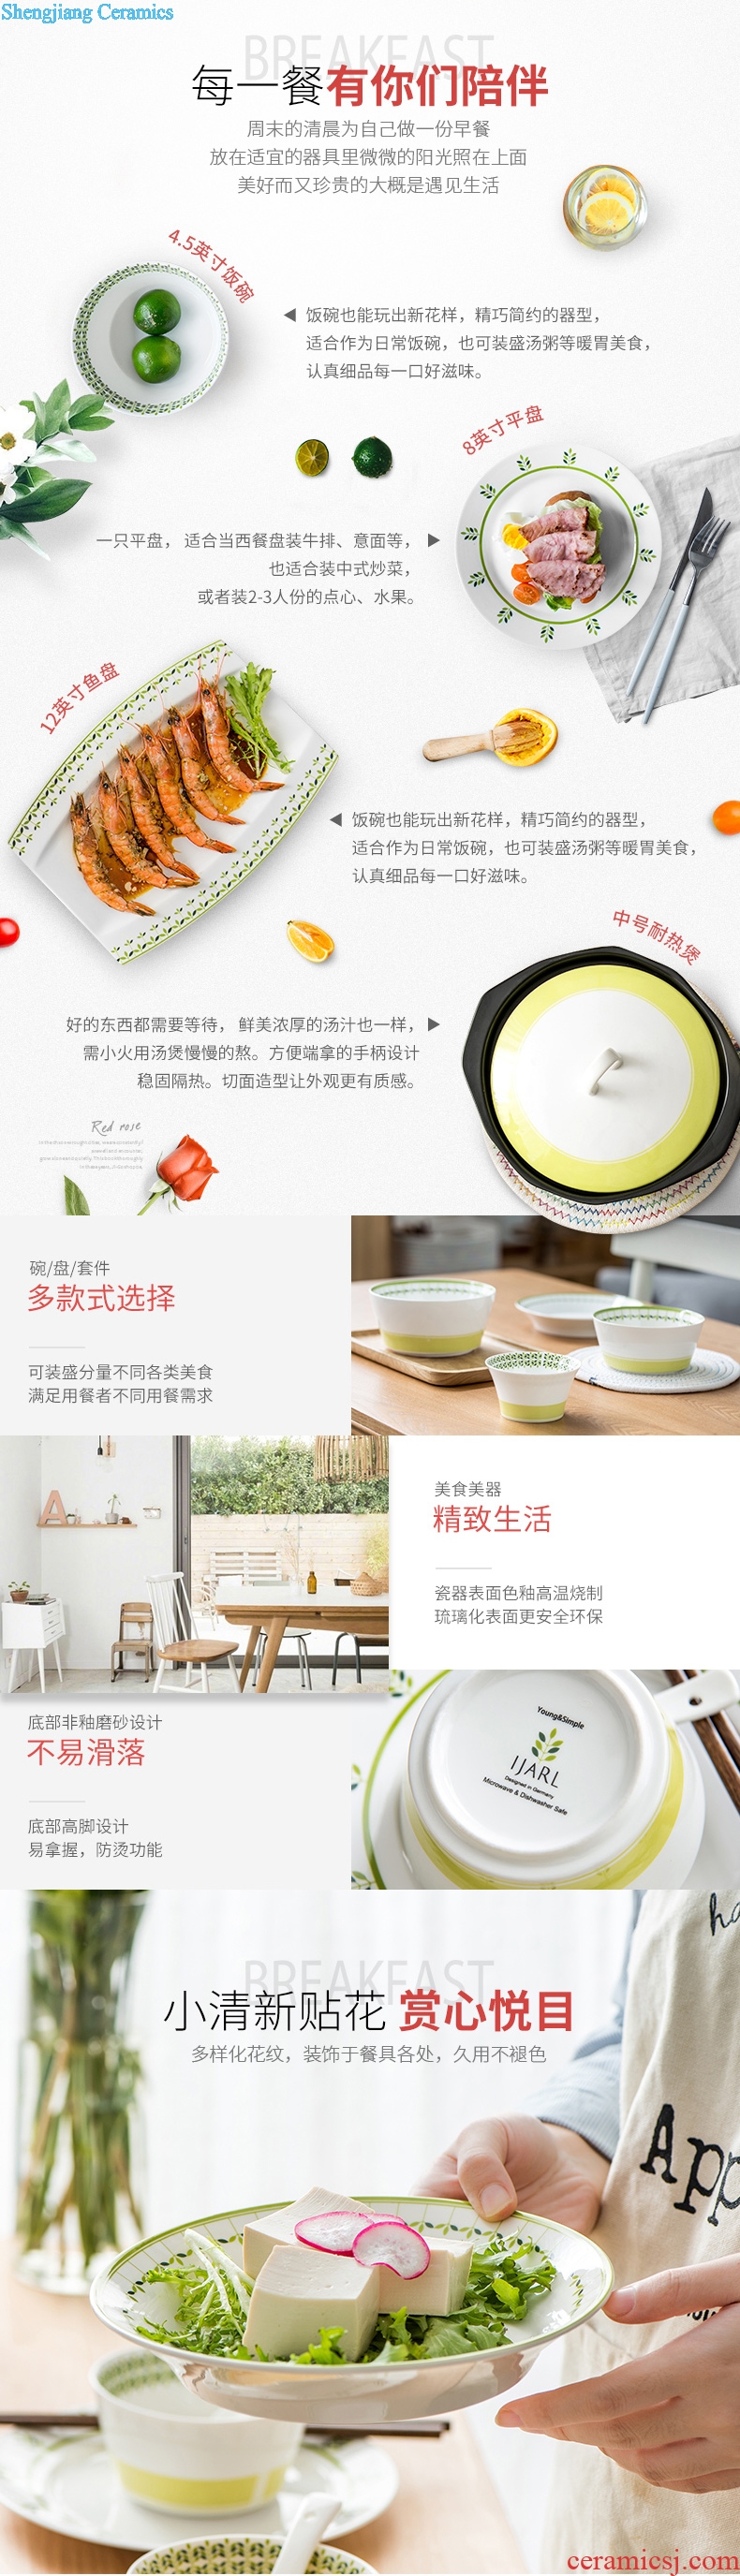 Ijarl million jia creative household new bone porcelain tableware of pottery and porcelain rice bowls rainbow noodle bowl bowl dish dishes dishes suit